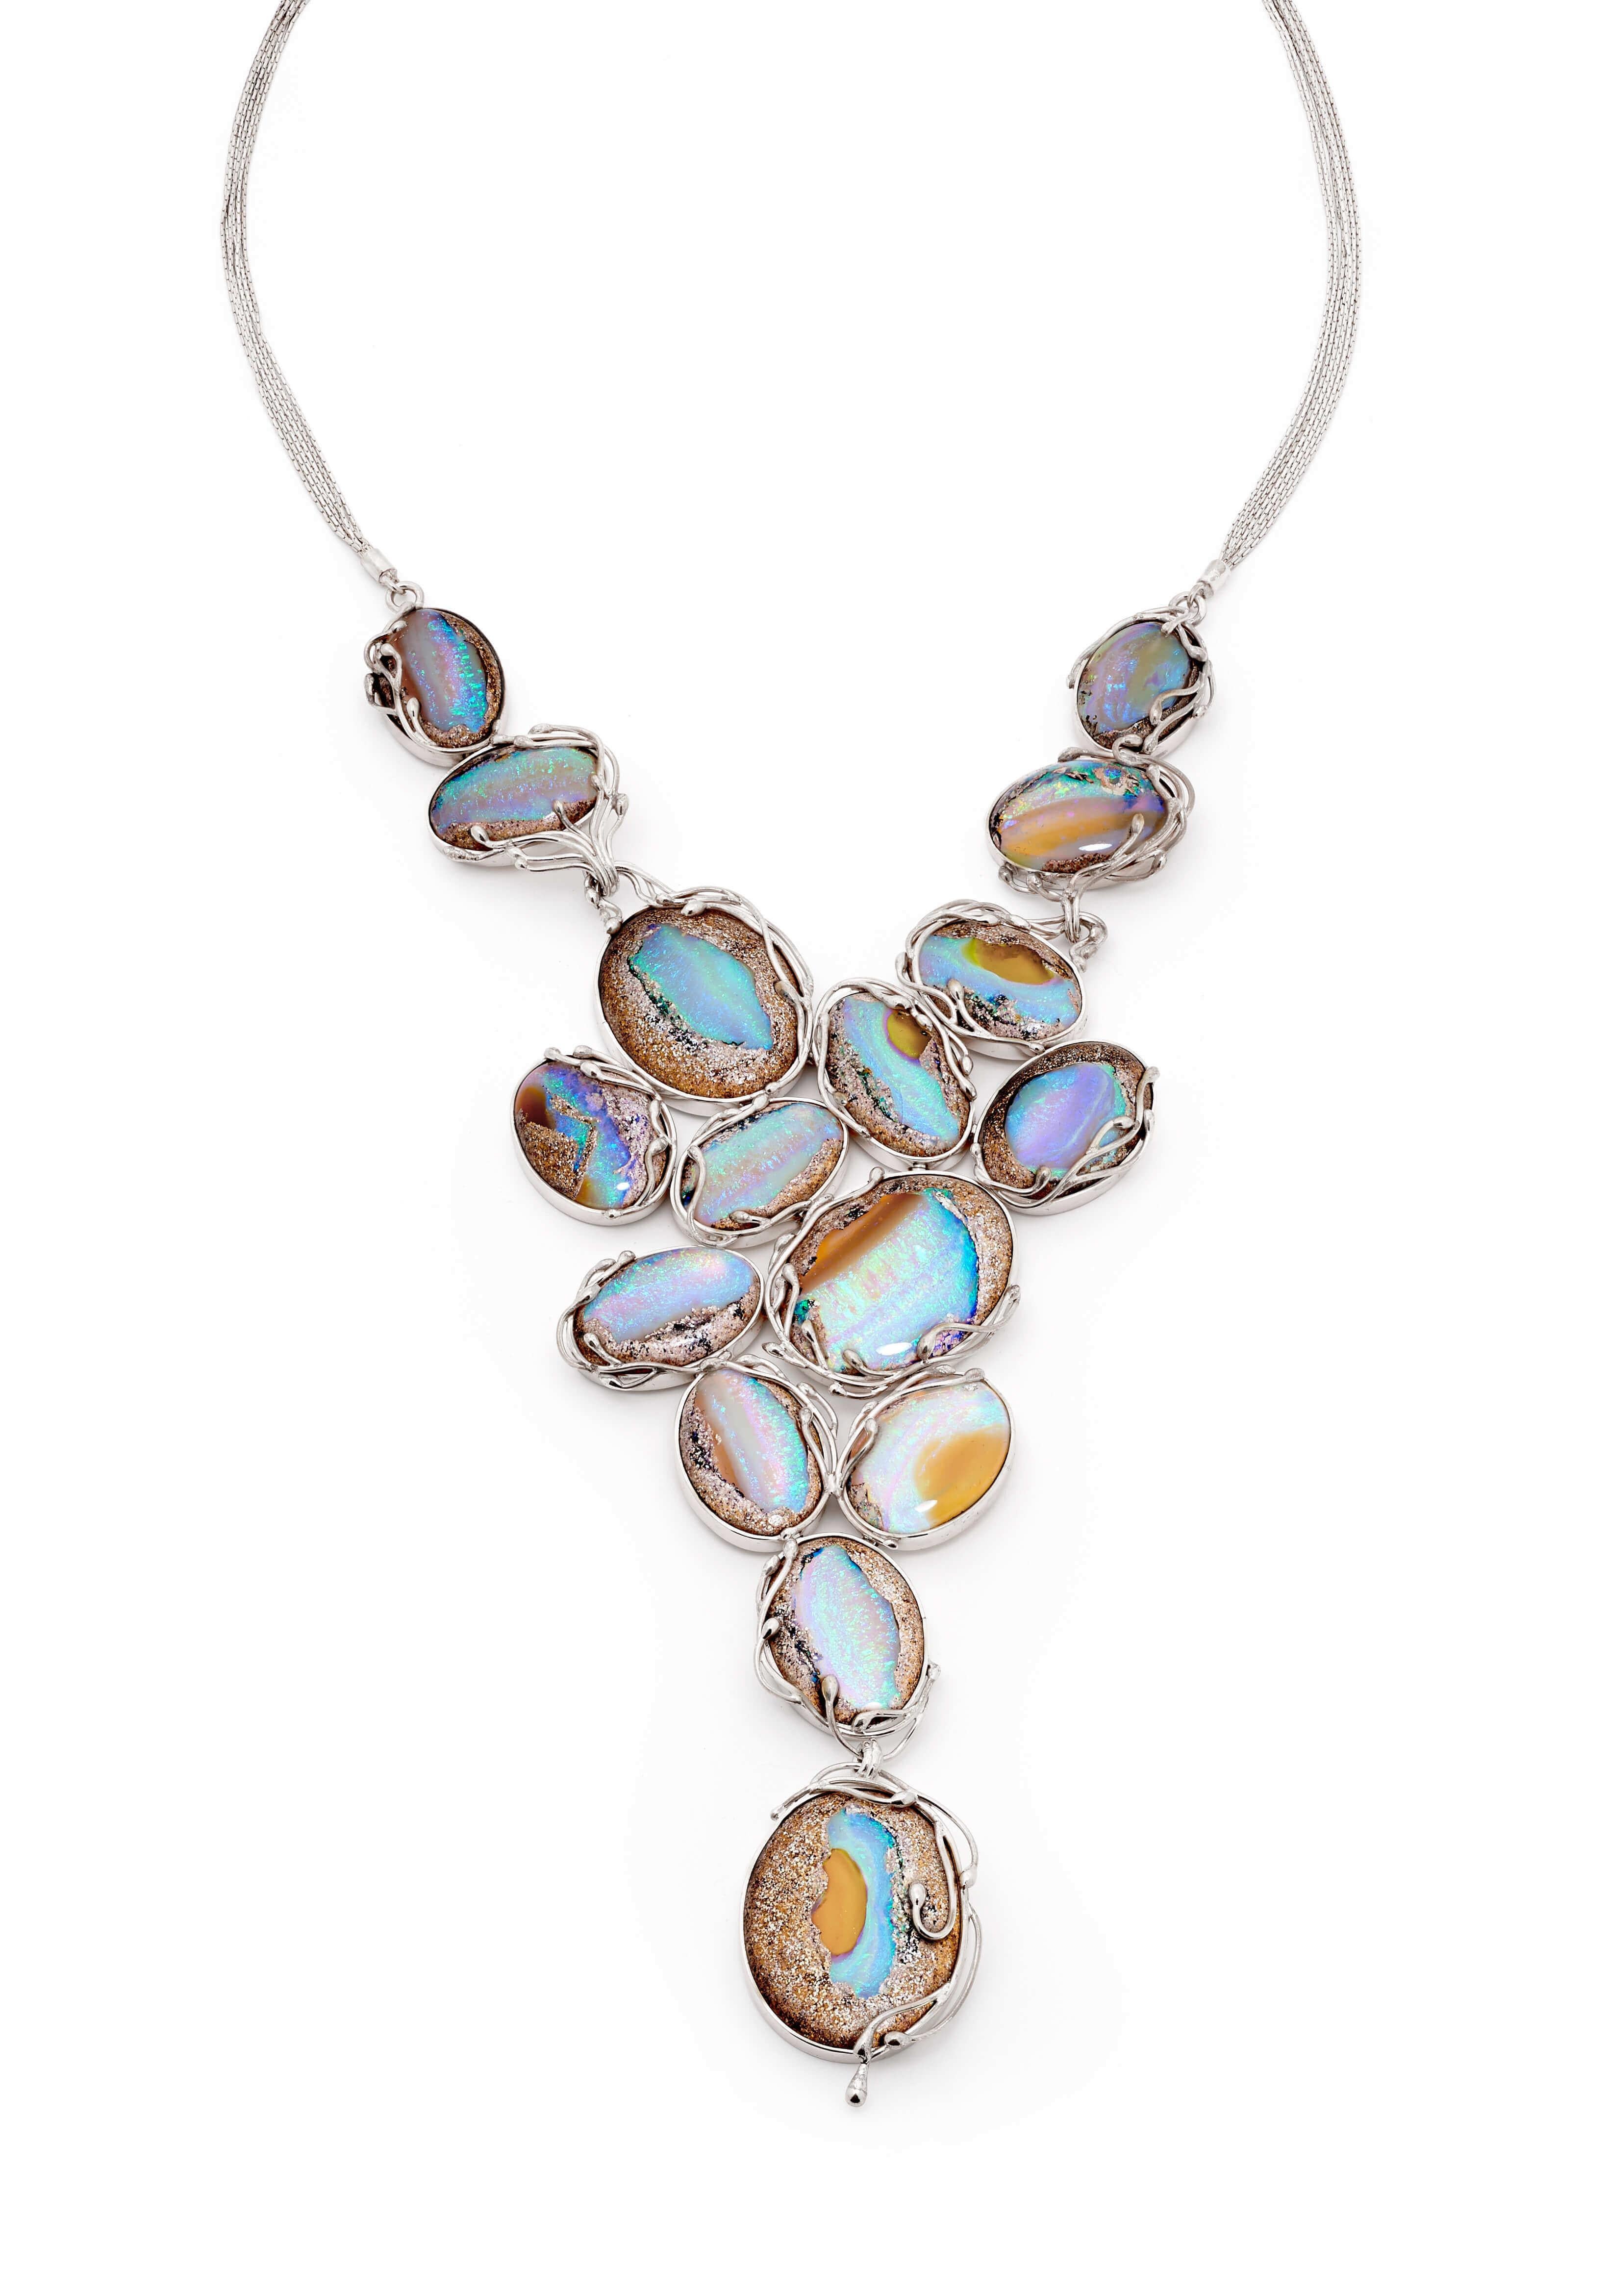 The regally sizeable ‘Cordelia’ boulder opal necklace set in sterling silver has style and substance, truly living up to its name of being the ‘jewel of the sea’. The gemstones of this precious pendant hail from our own opal mines in